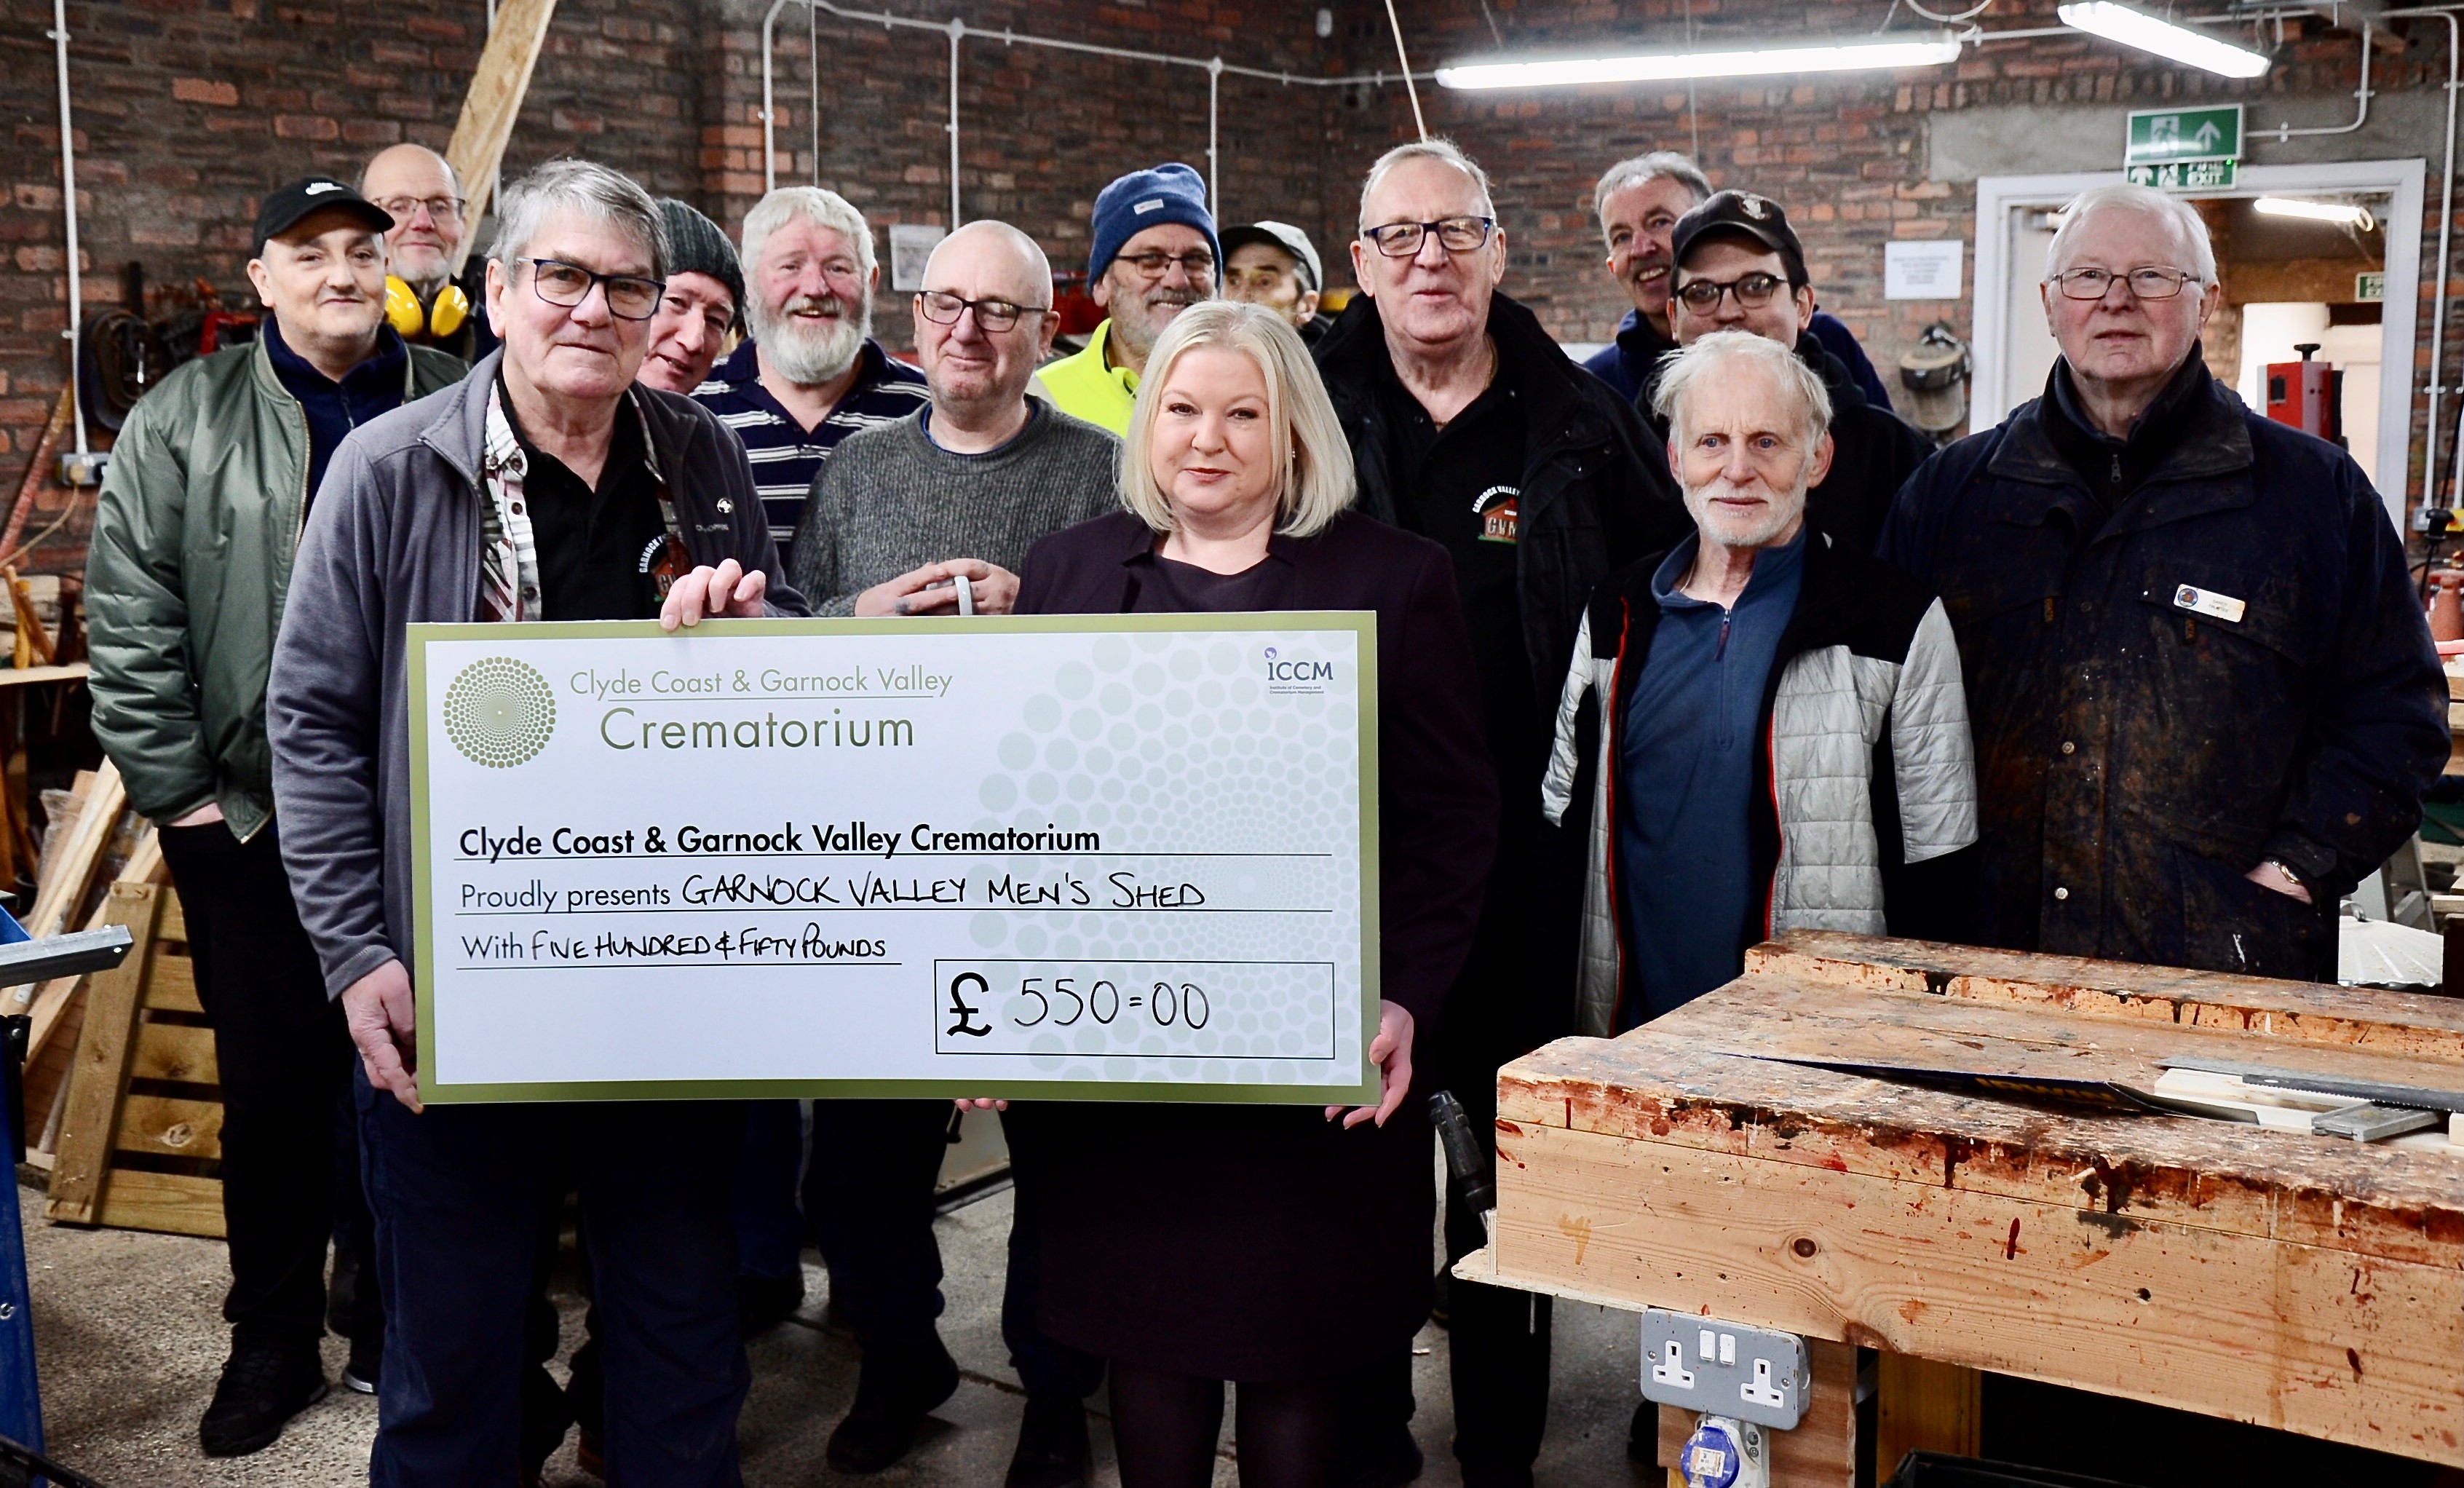 Clyde Coast & Garnock Valley Crematorium Continues Support of Local Charities